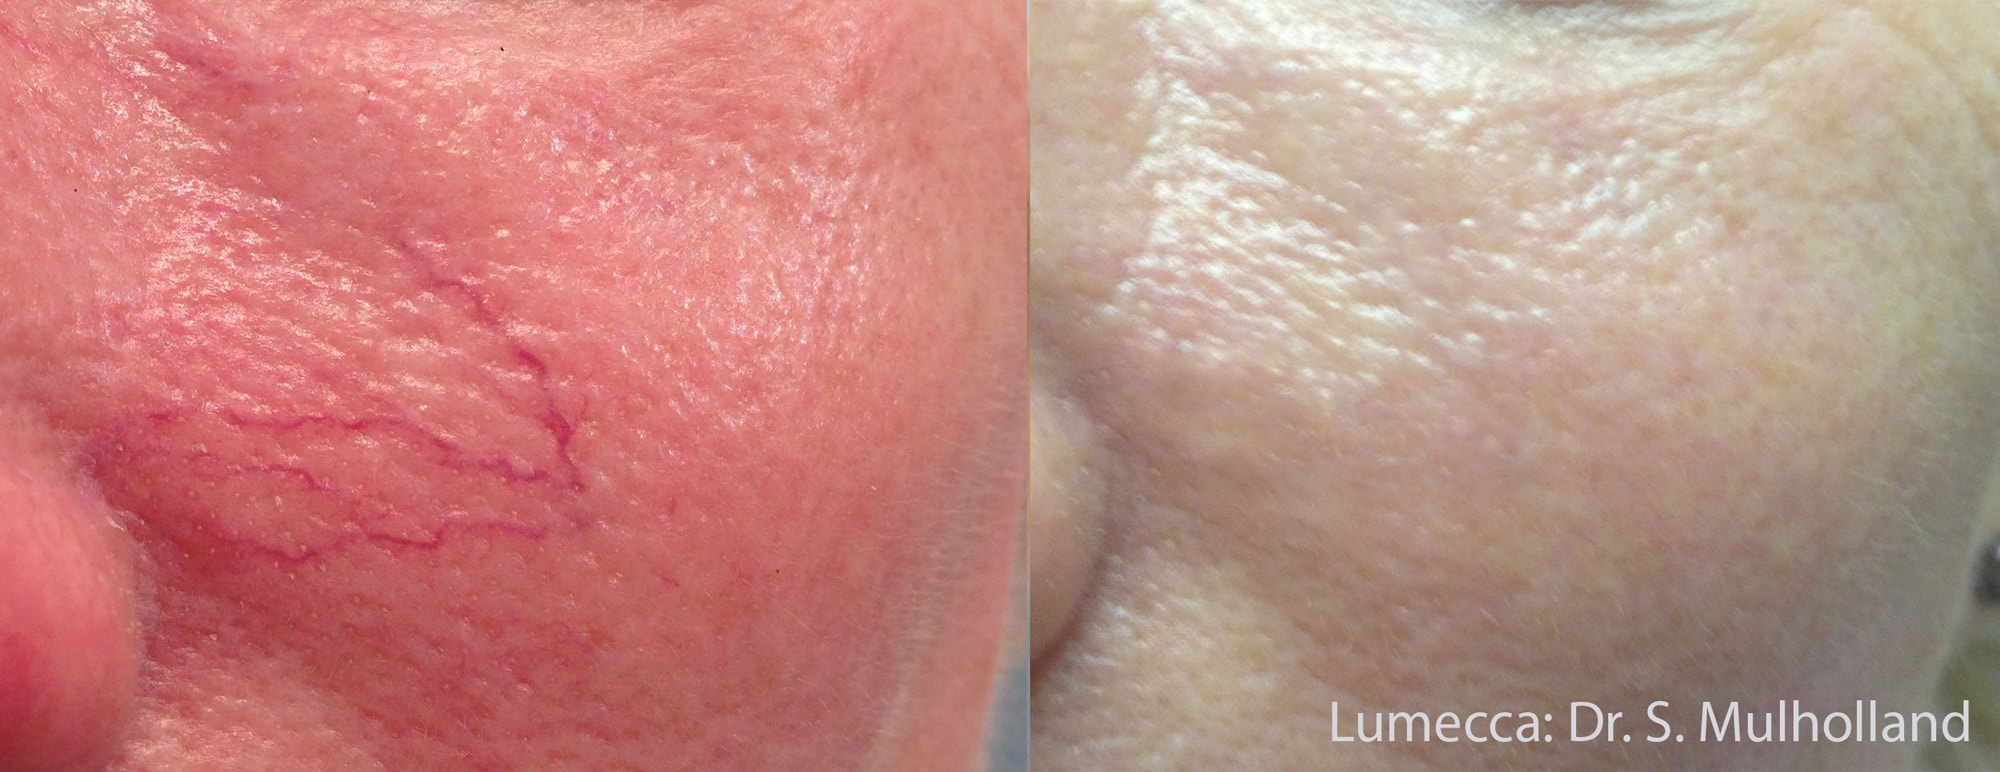 Before and After photos showing the results of Lumecca treatments eliminating prominent blood vessels on a man’s cheeks